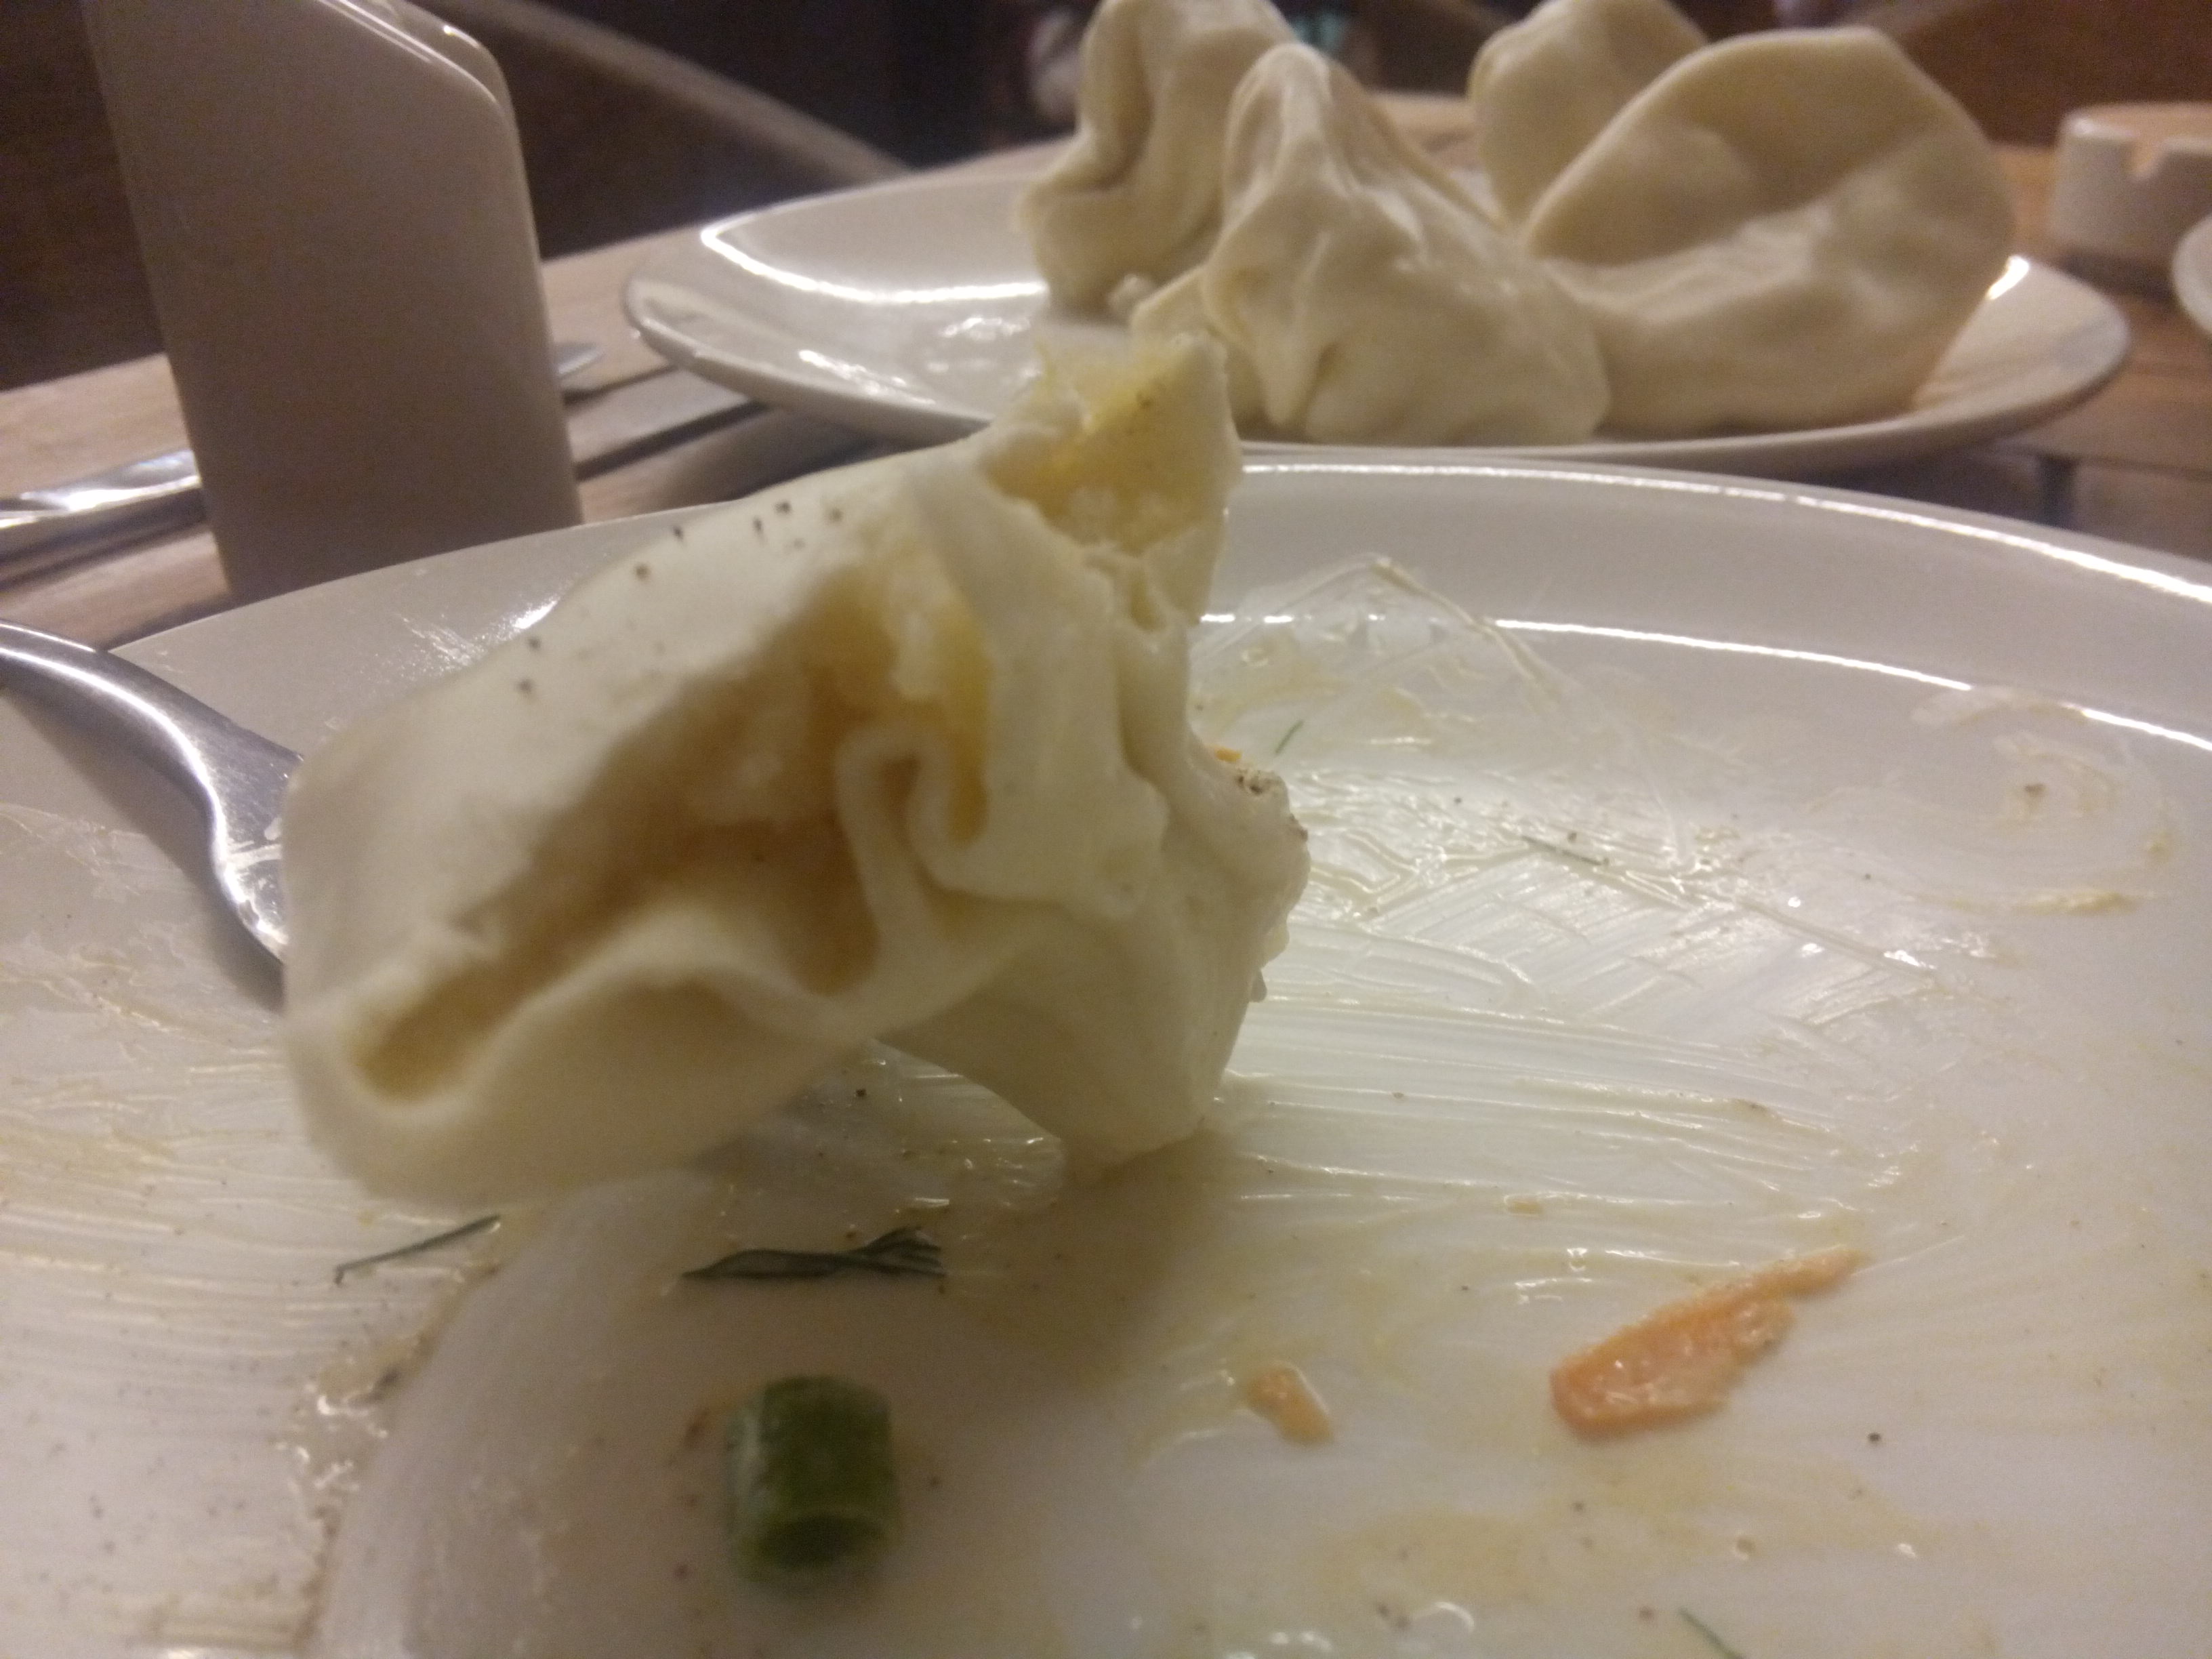 A half eaten dumpling with potato inside, and in the background more dumplings